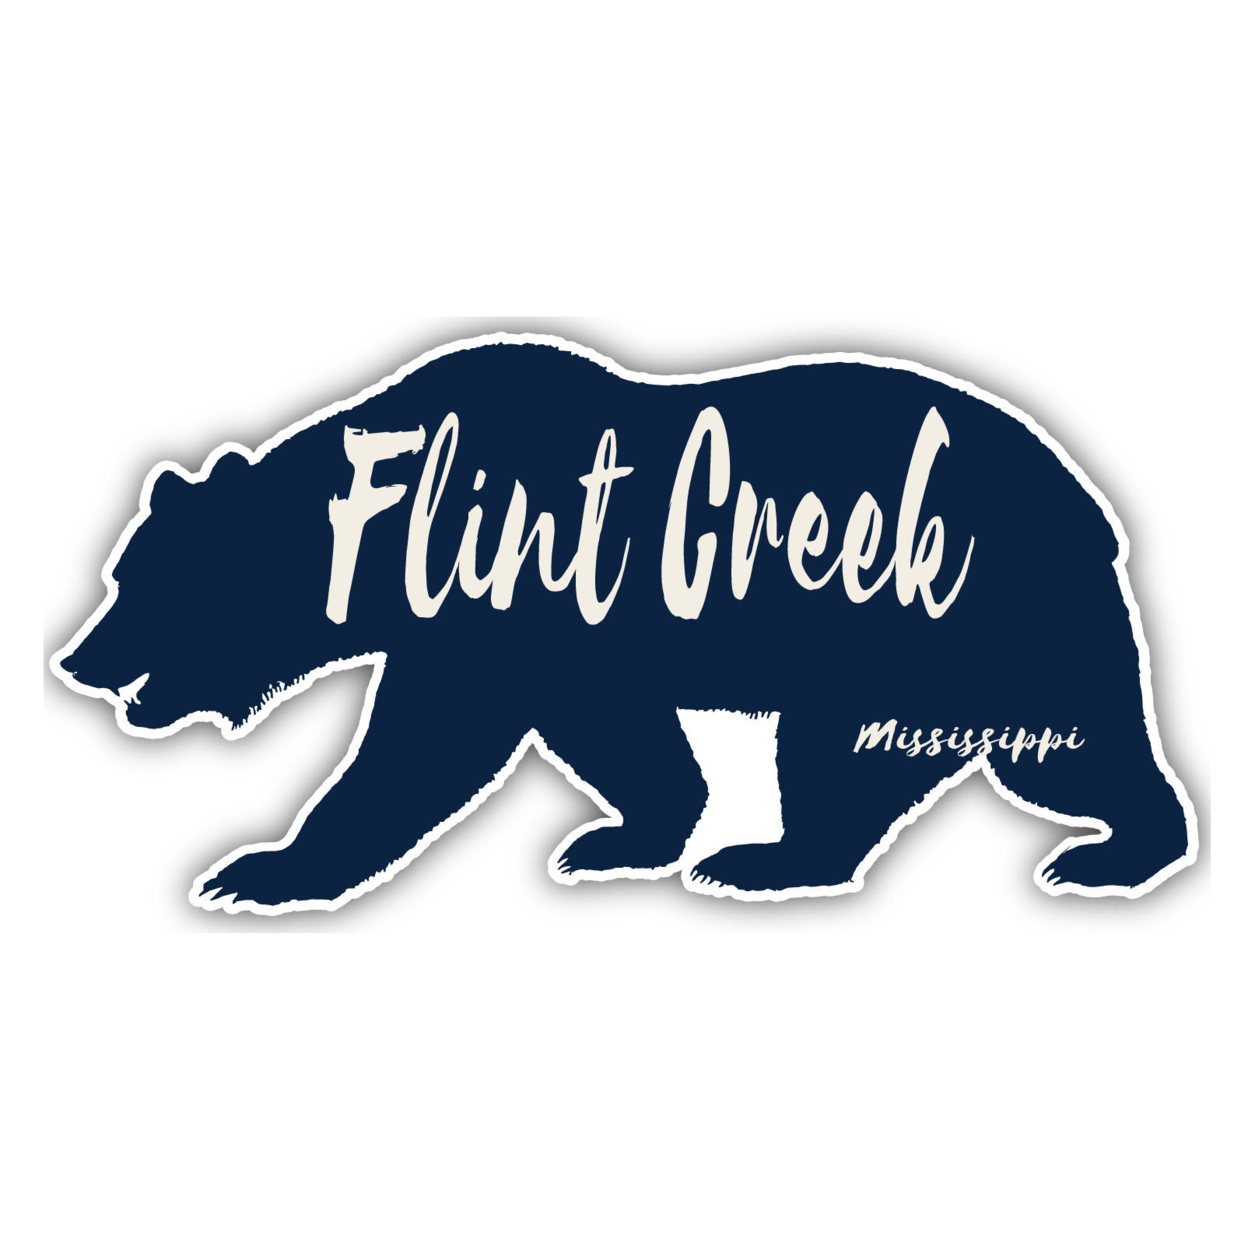 Flint Creek Mississippi Souvenir Decorative Stickers (Choose Theme And Size) - 4-Pack, 12-Inch, Bear